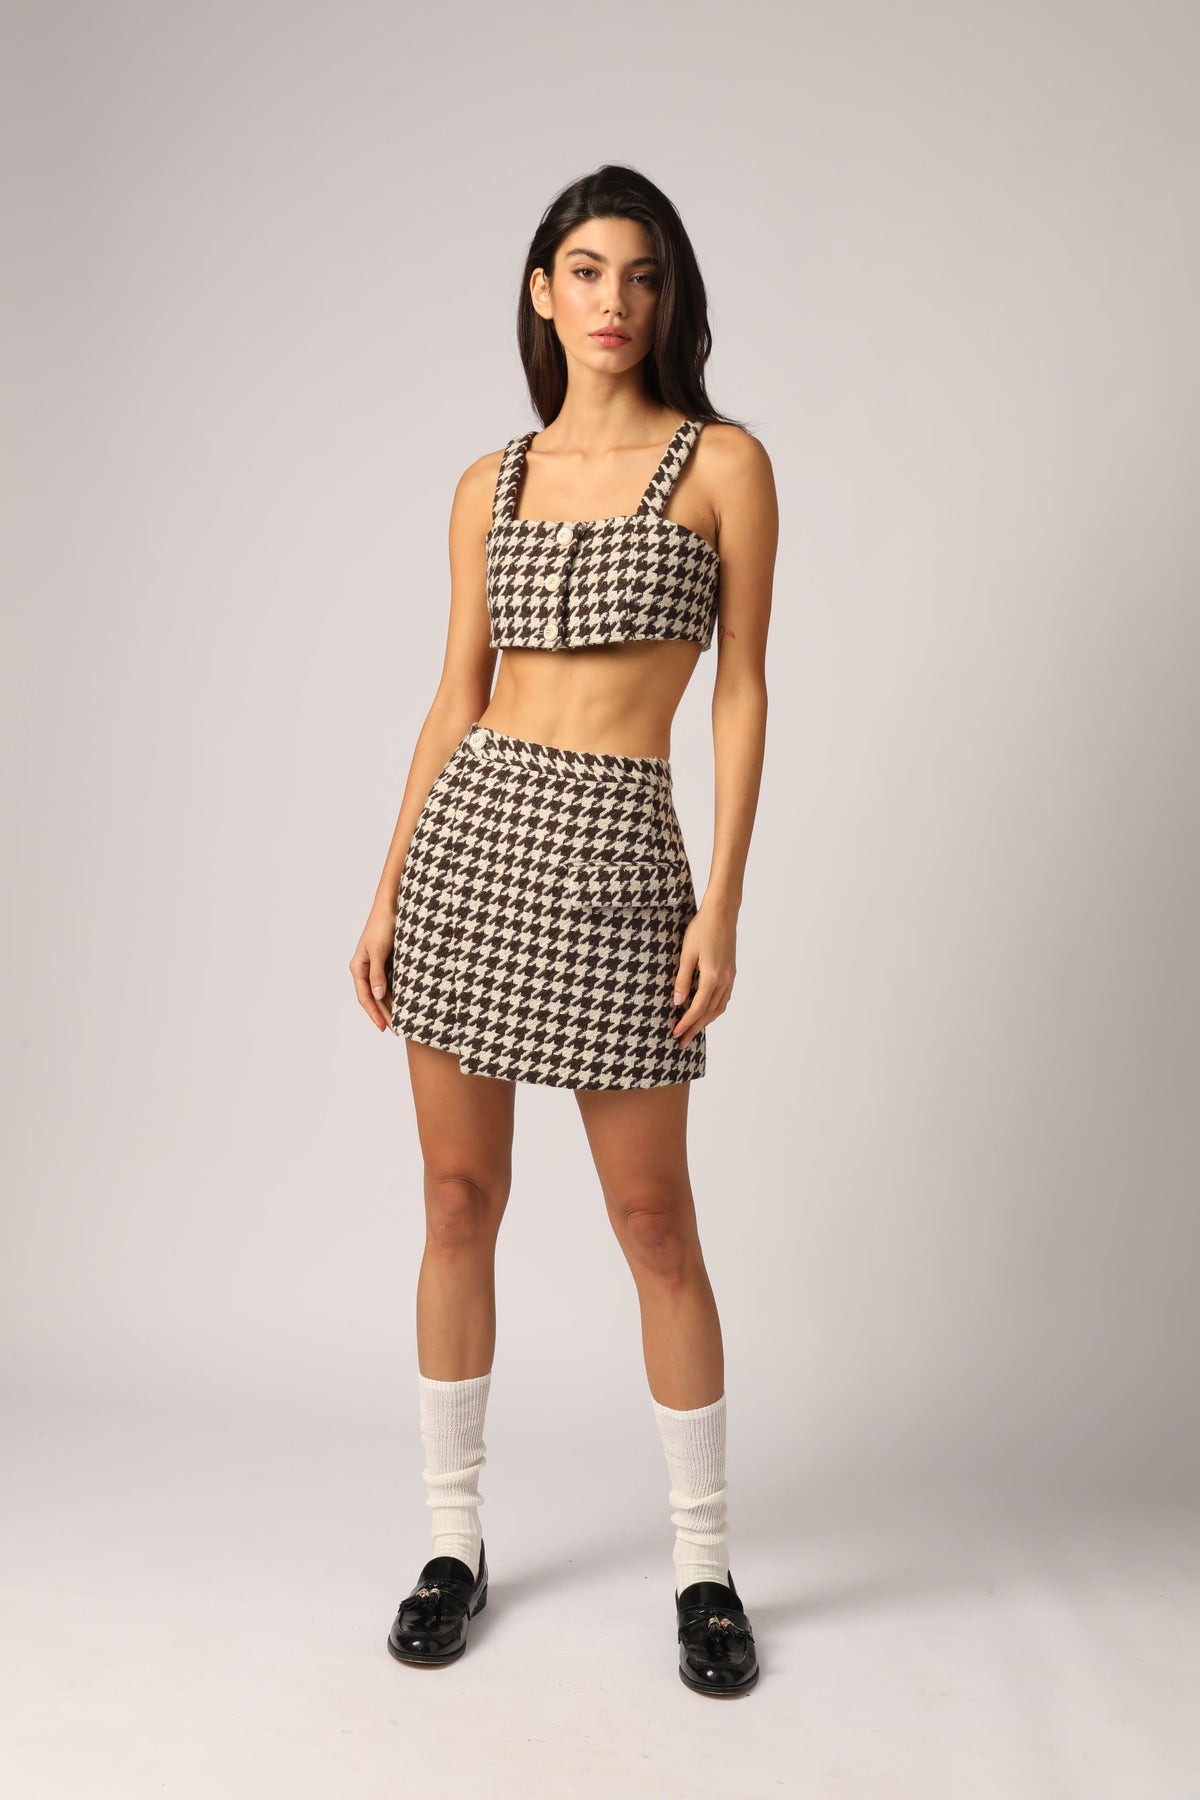 Beige Houndstooth Skirt - By Quaint